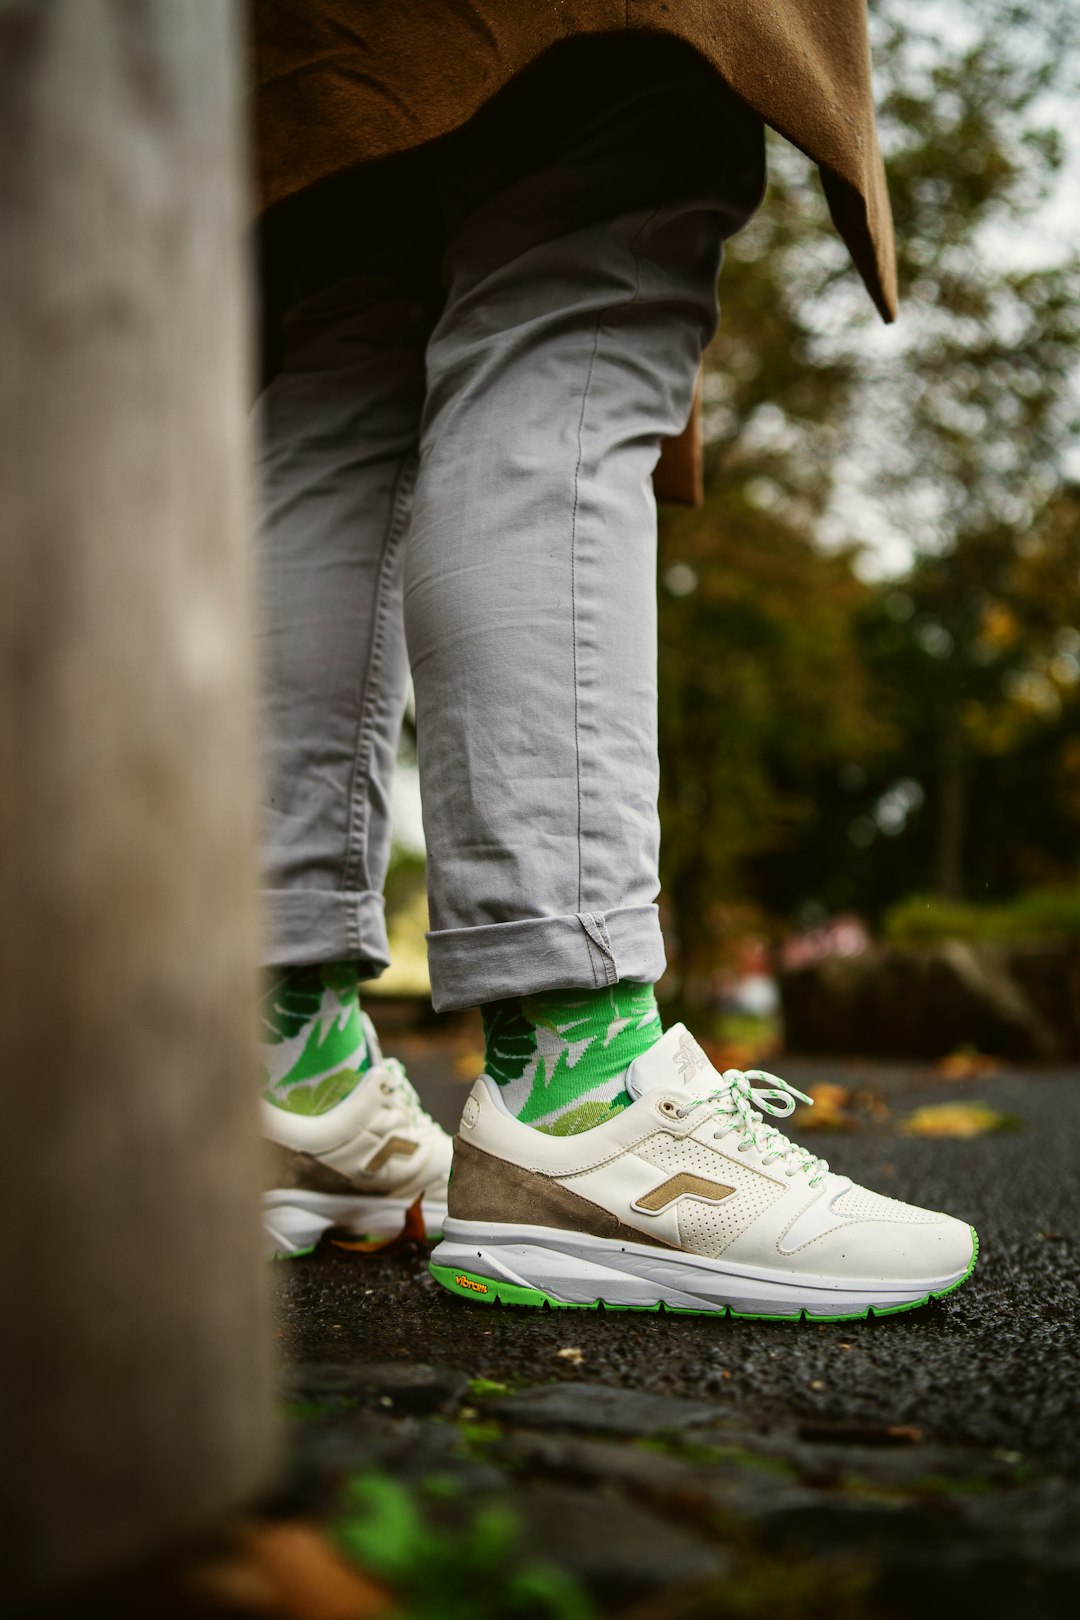 person in gray pants wearing green and white nike sneakers